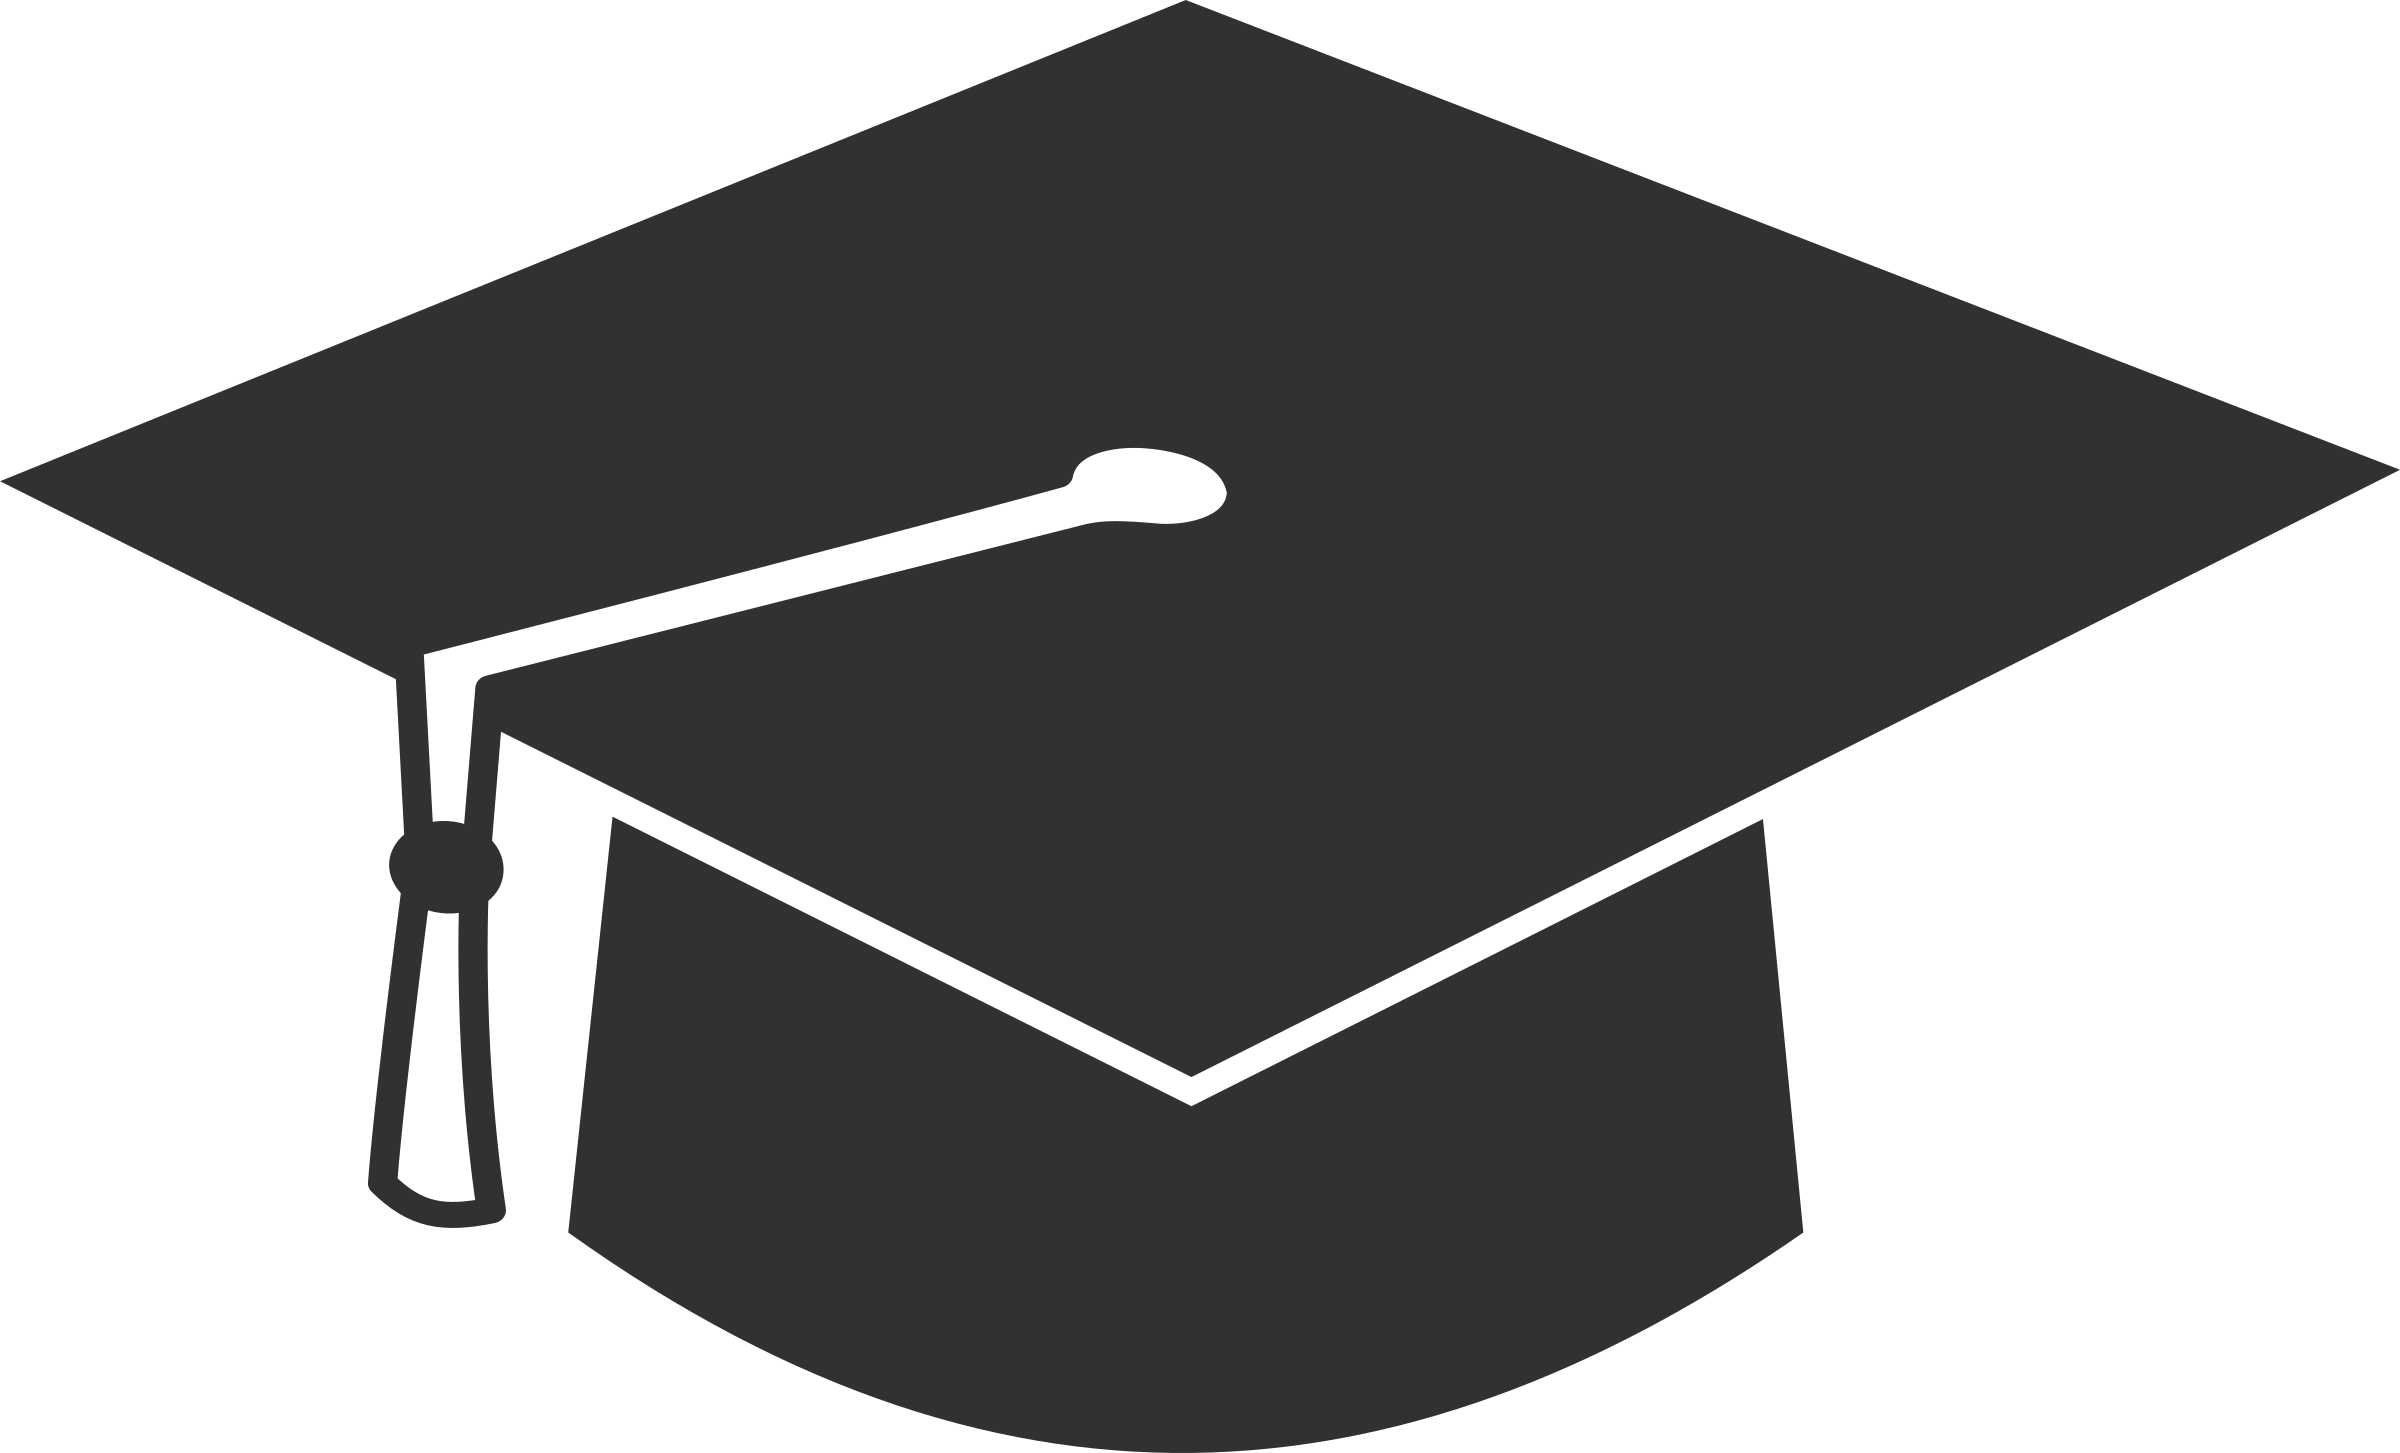 Graduation cap template clipart images gallery for free